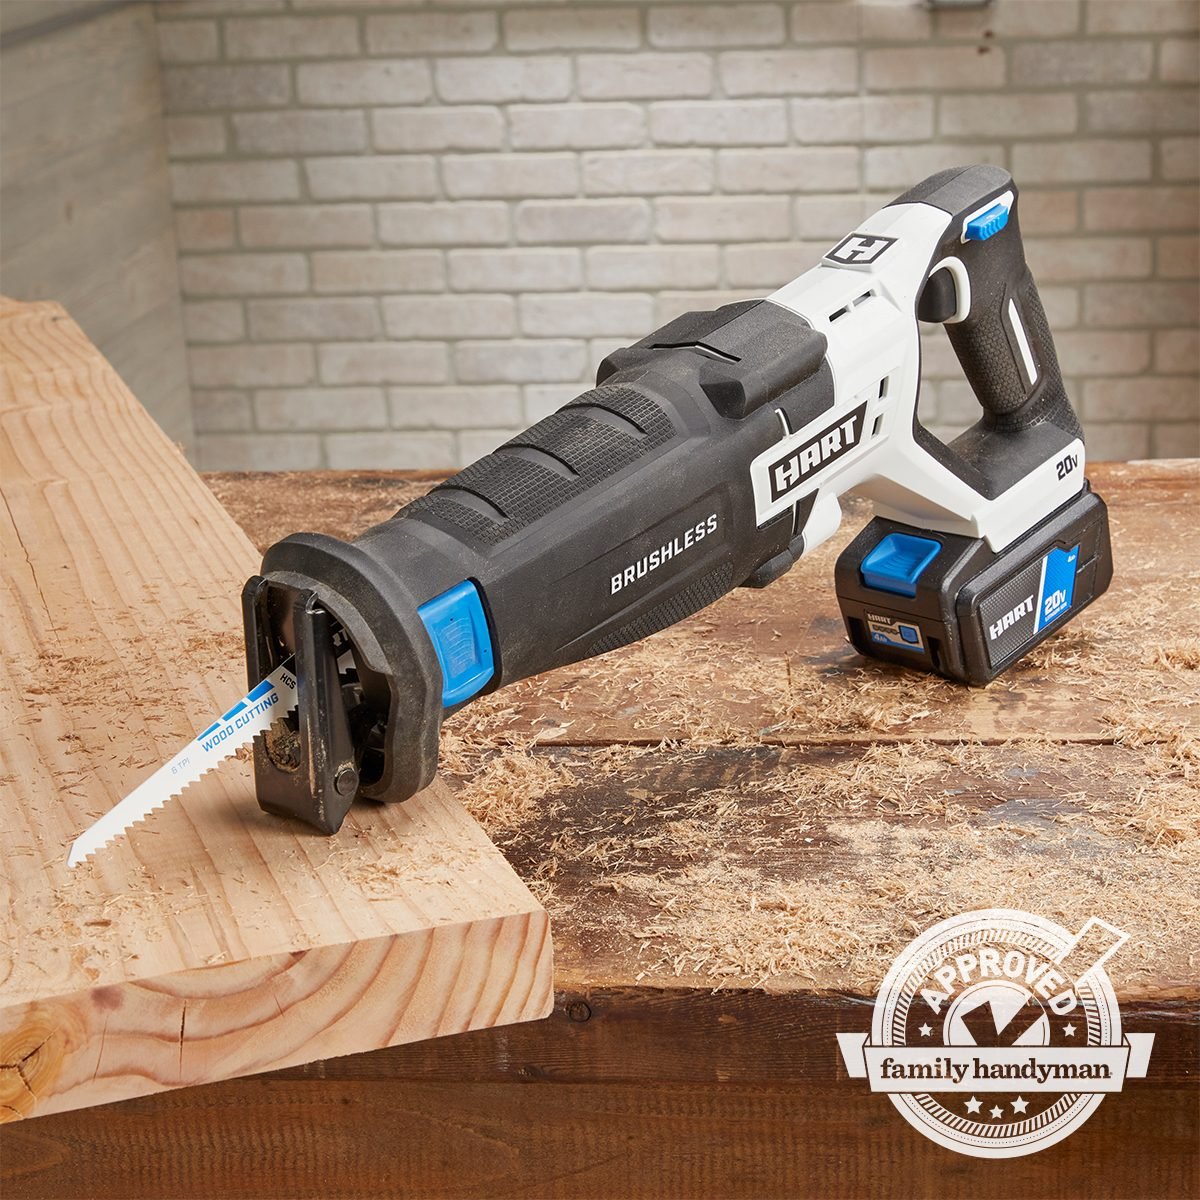 Family Handyman Approved: Hart Brushless Reciprocating Saw